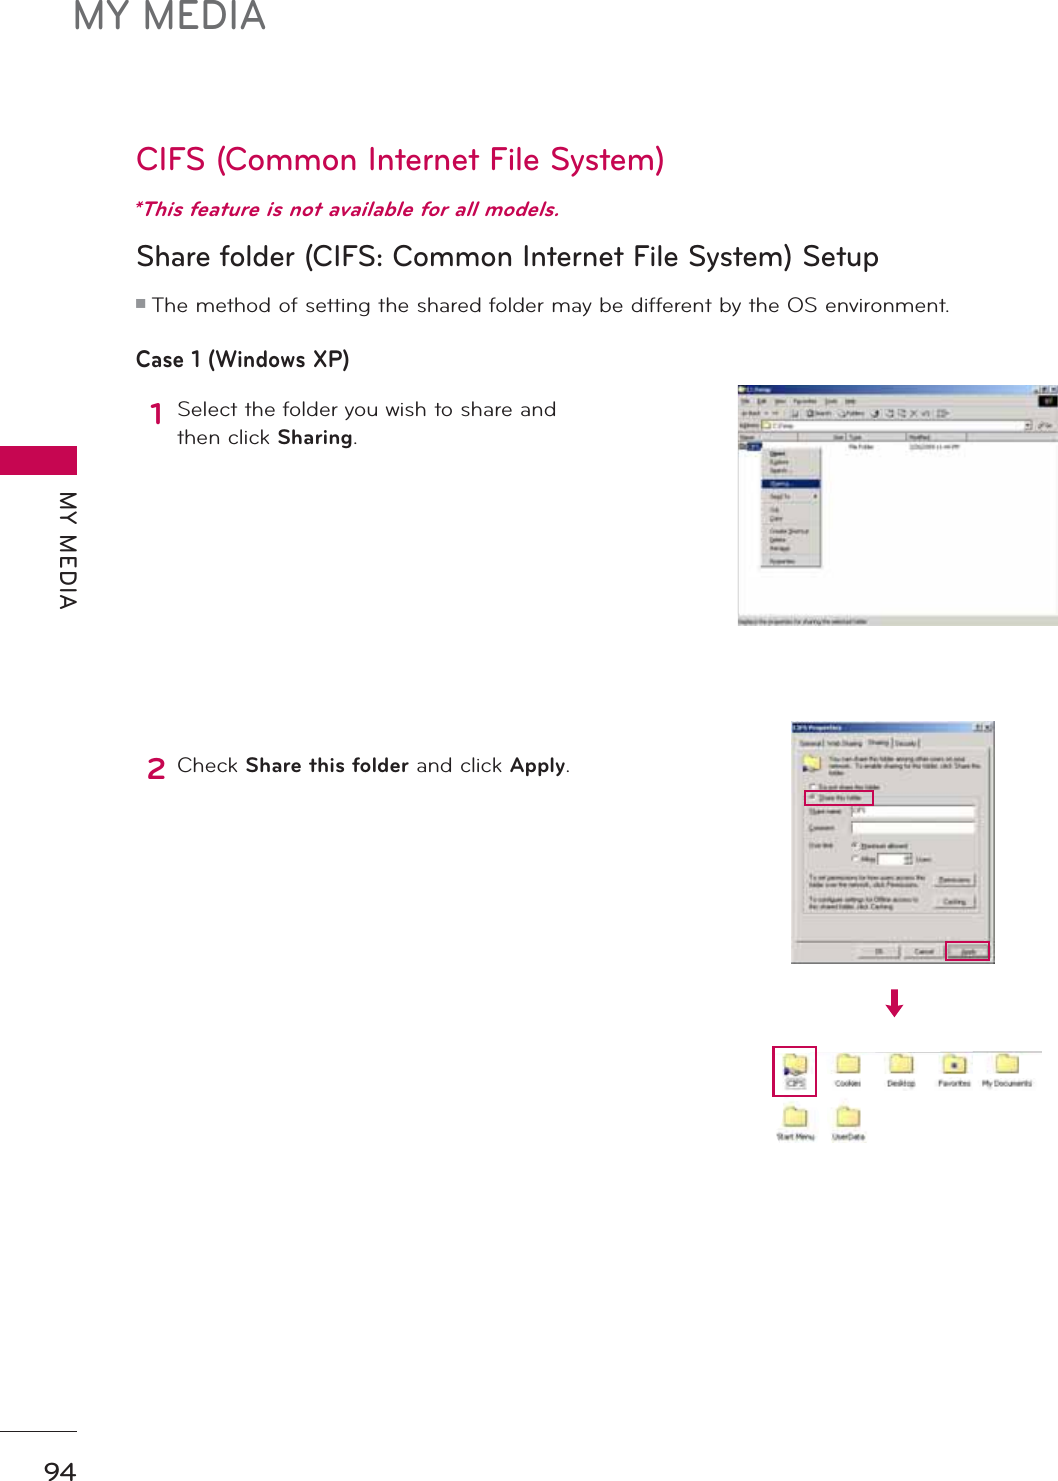 MY MEDIAMY MEDIA94CIFS (Common Internet File System)Share folder (CIFS: Common Internet File System) SetupCase 1 (Windows XP)ᯫThe method of setting the shared folder may be different by the OS environment. 1Select the folder you wish to share and then click Sharing.2Check Share this folder and click Apply.*This feature is not available for all models.